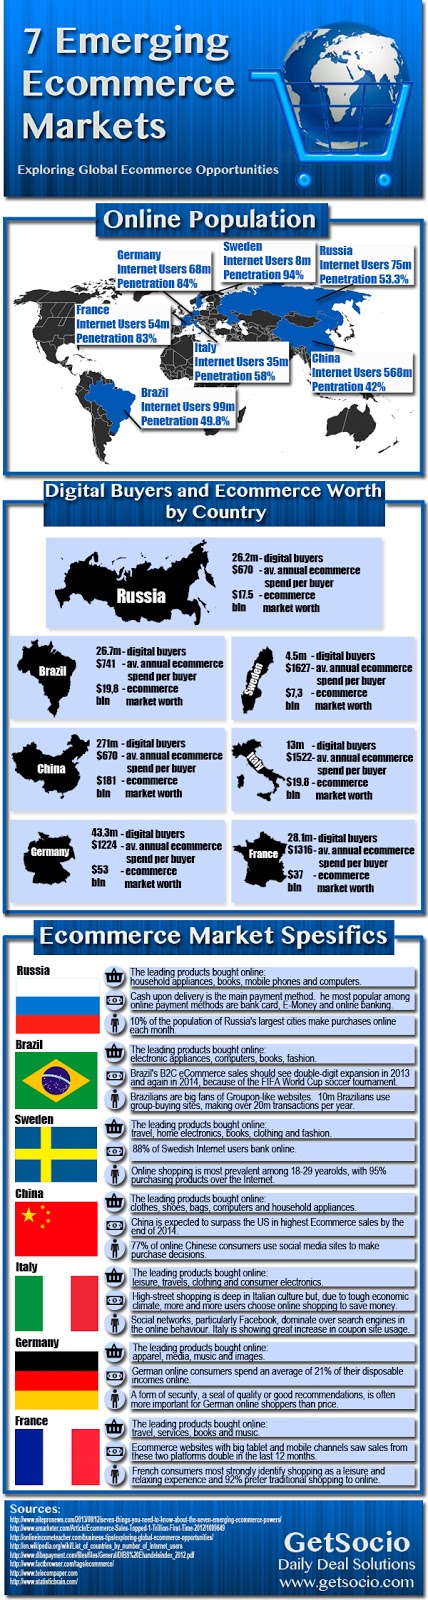 Global ecommerce opportunities